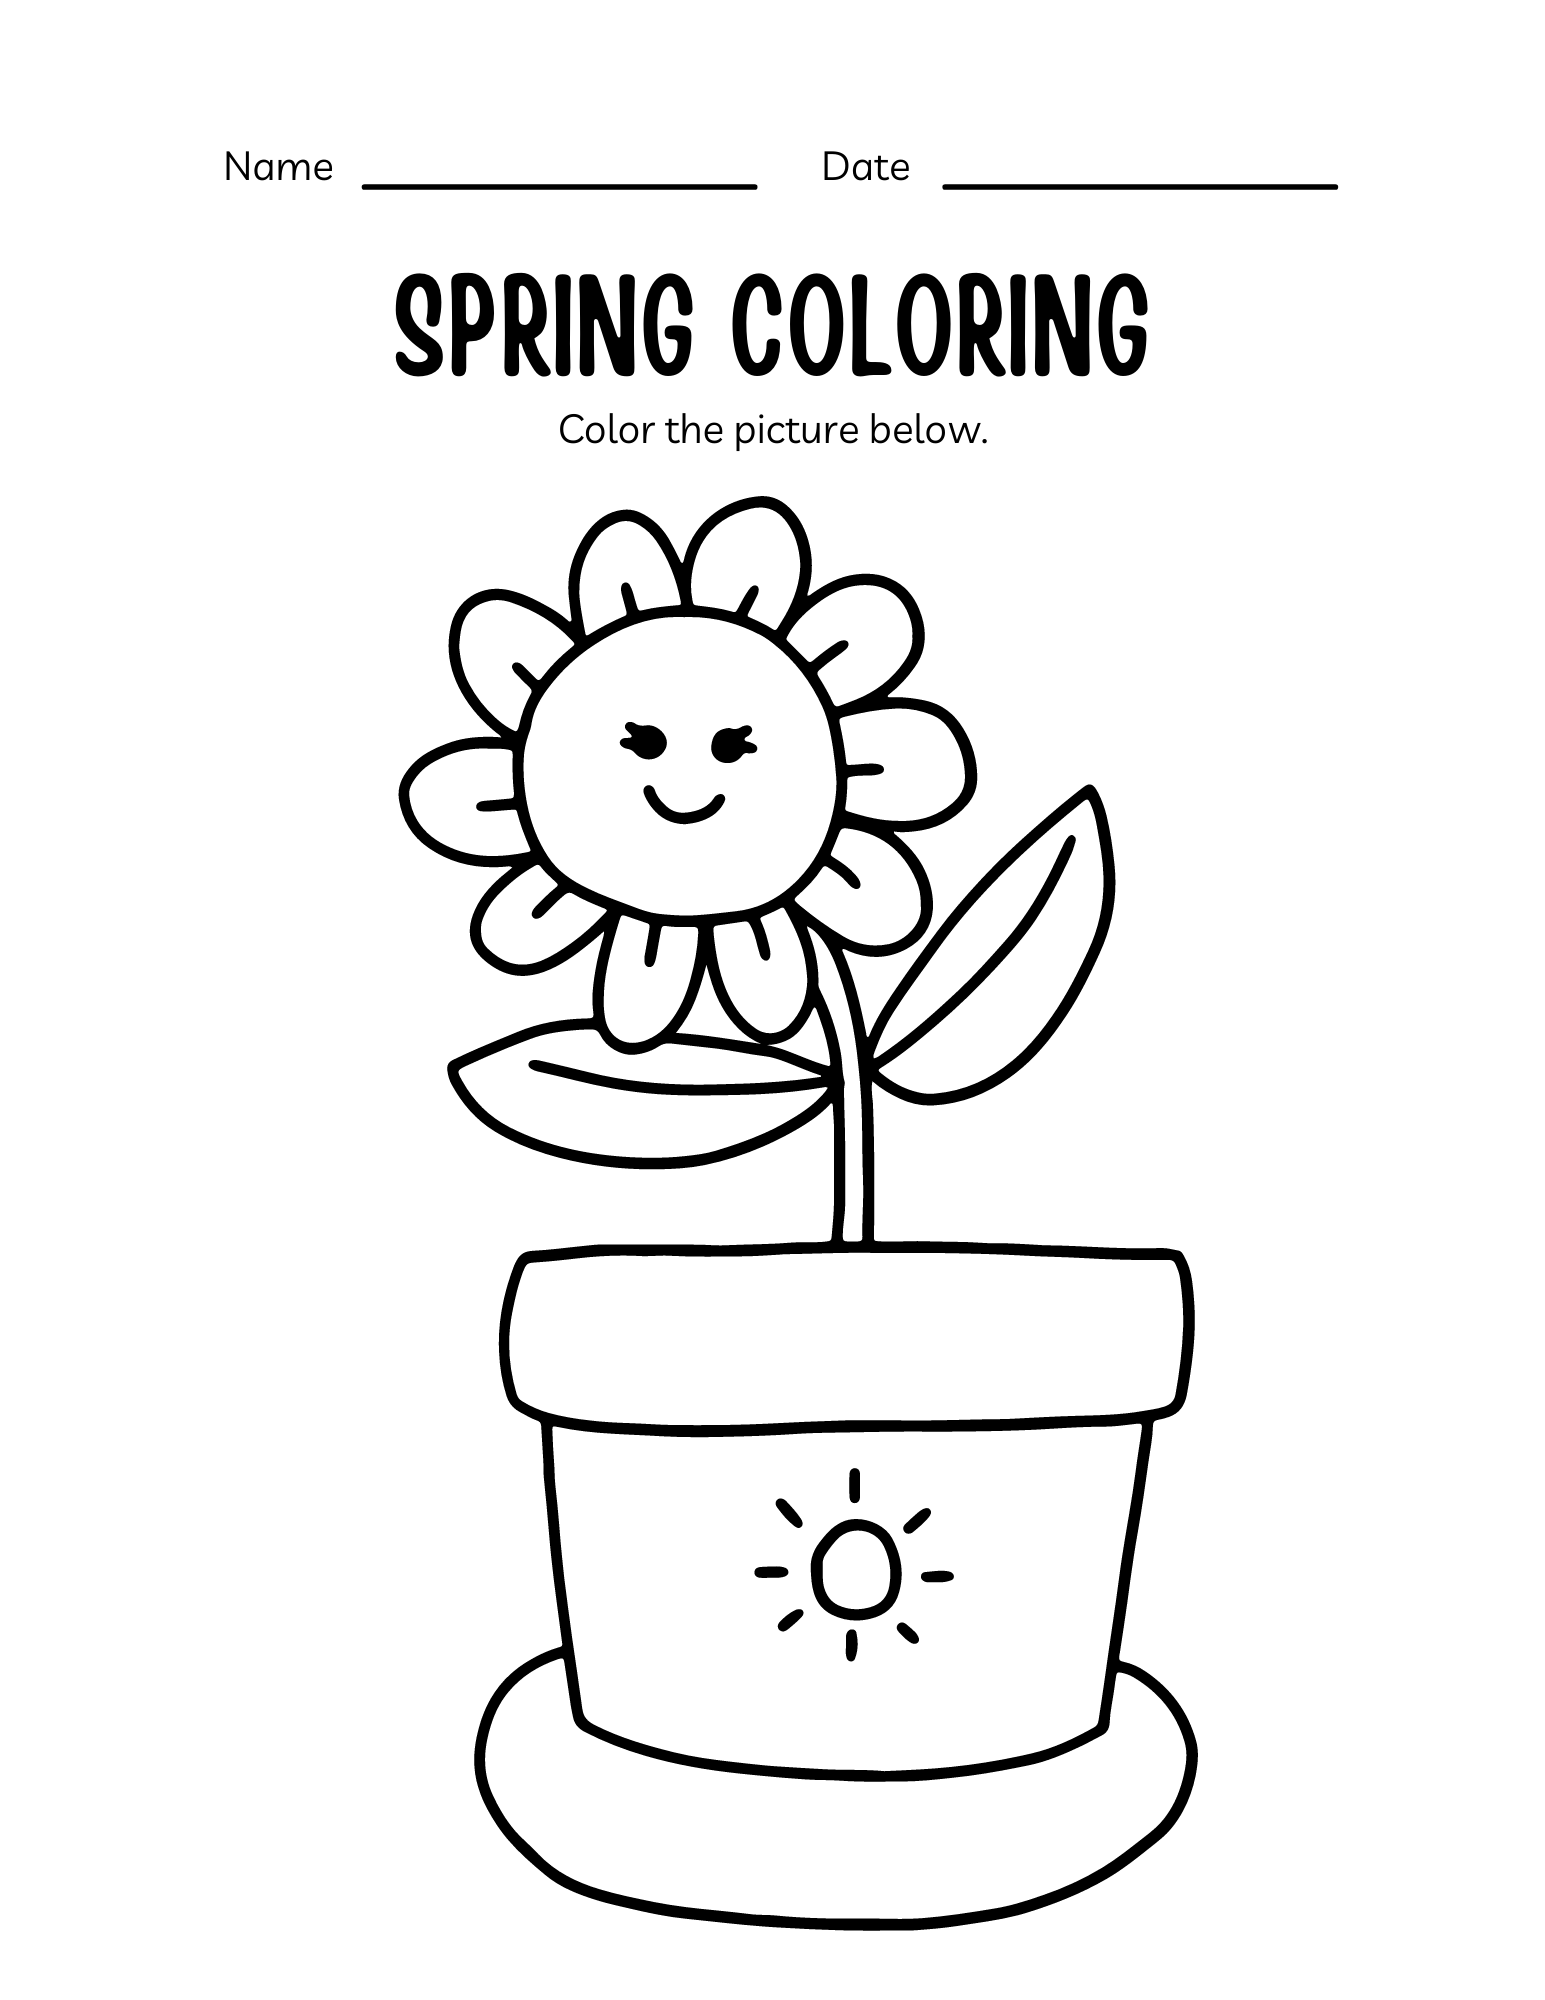 10 FREE Spring Themed Coloring Pages — xoxoerinsmith.com